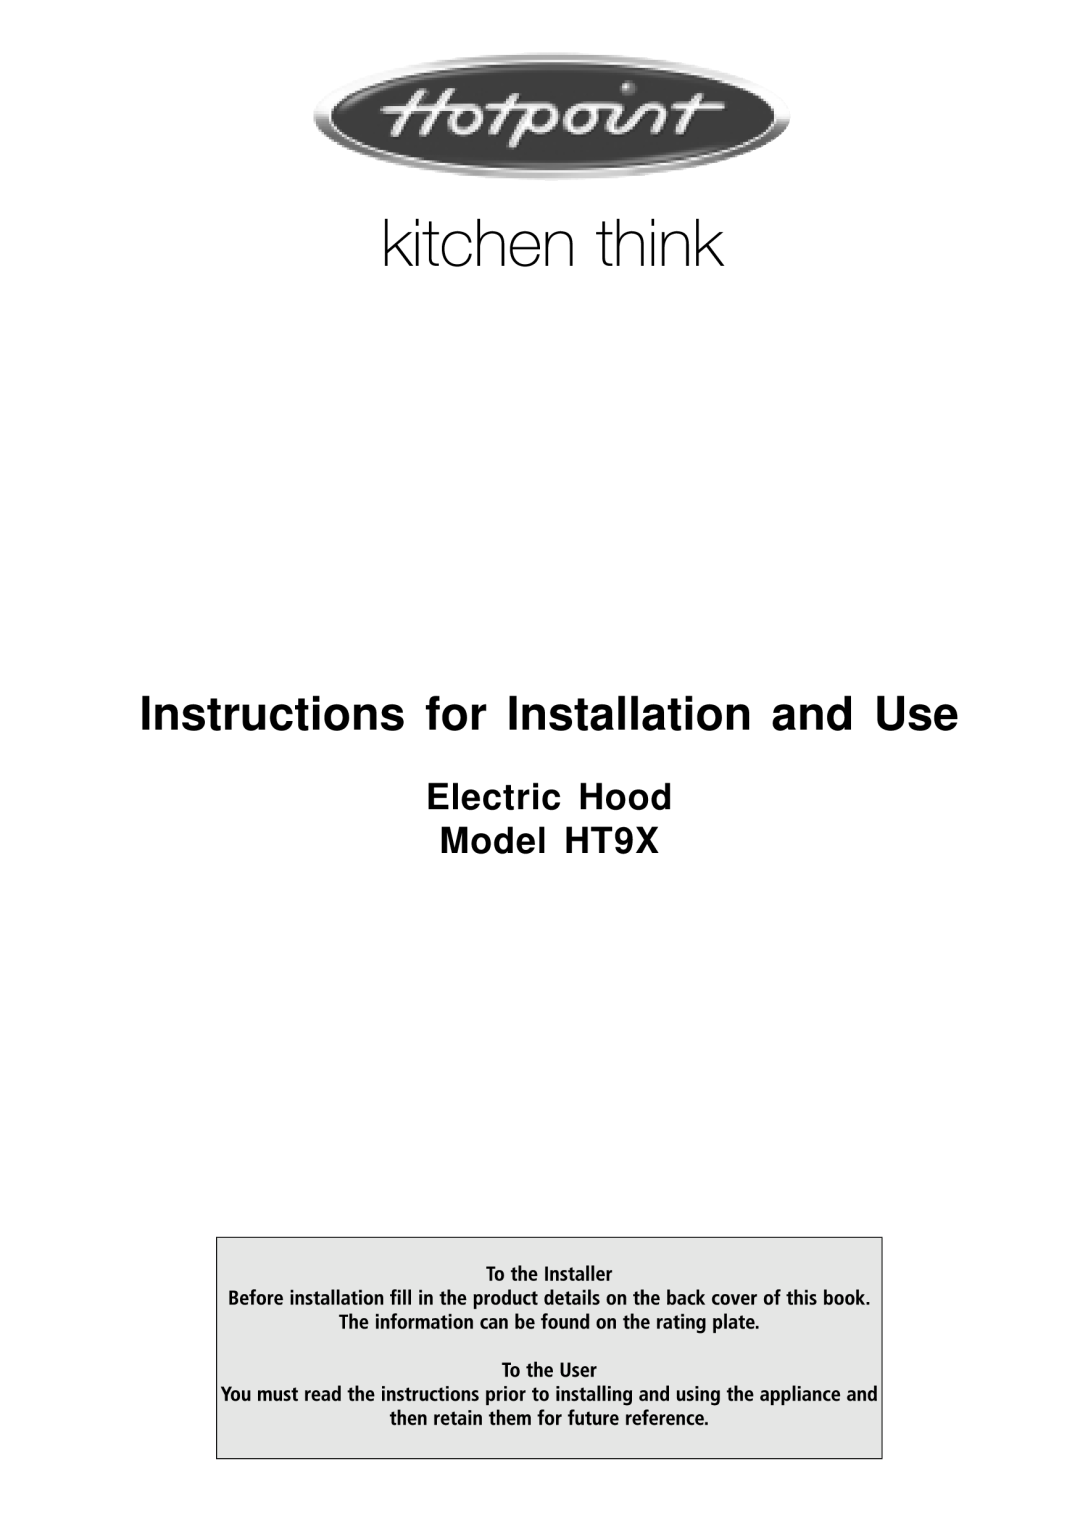 Hotpoint manual Electric Hood Model HT9X, Instructions for Installation and Use 